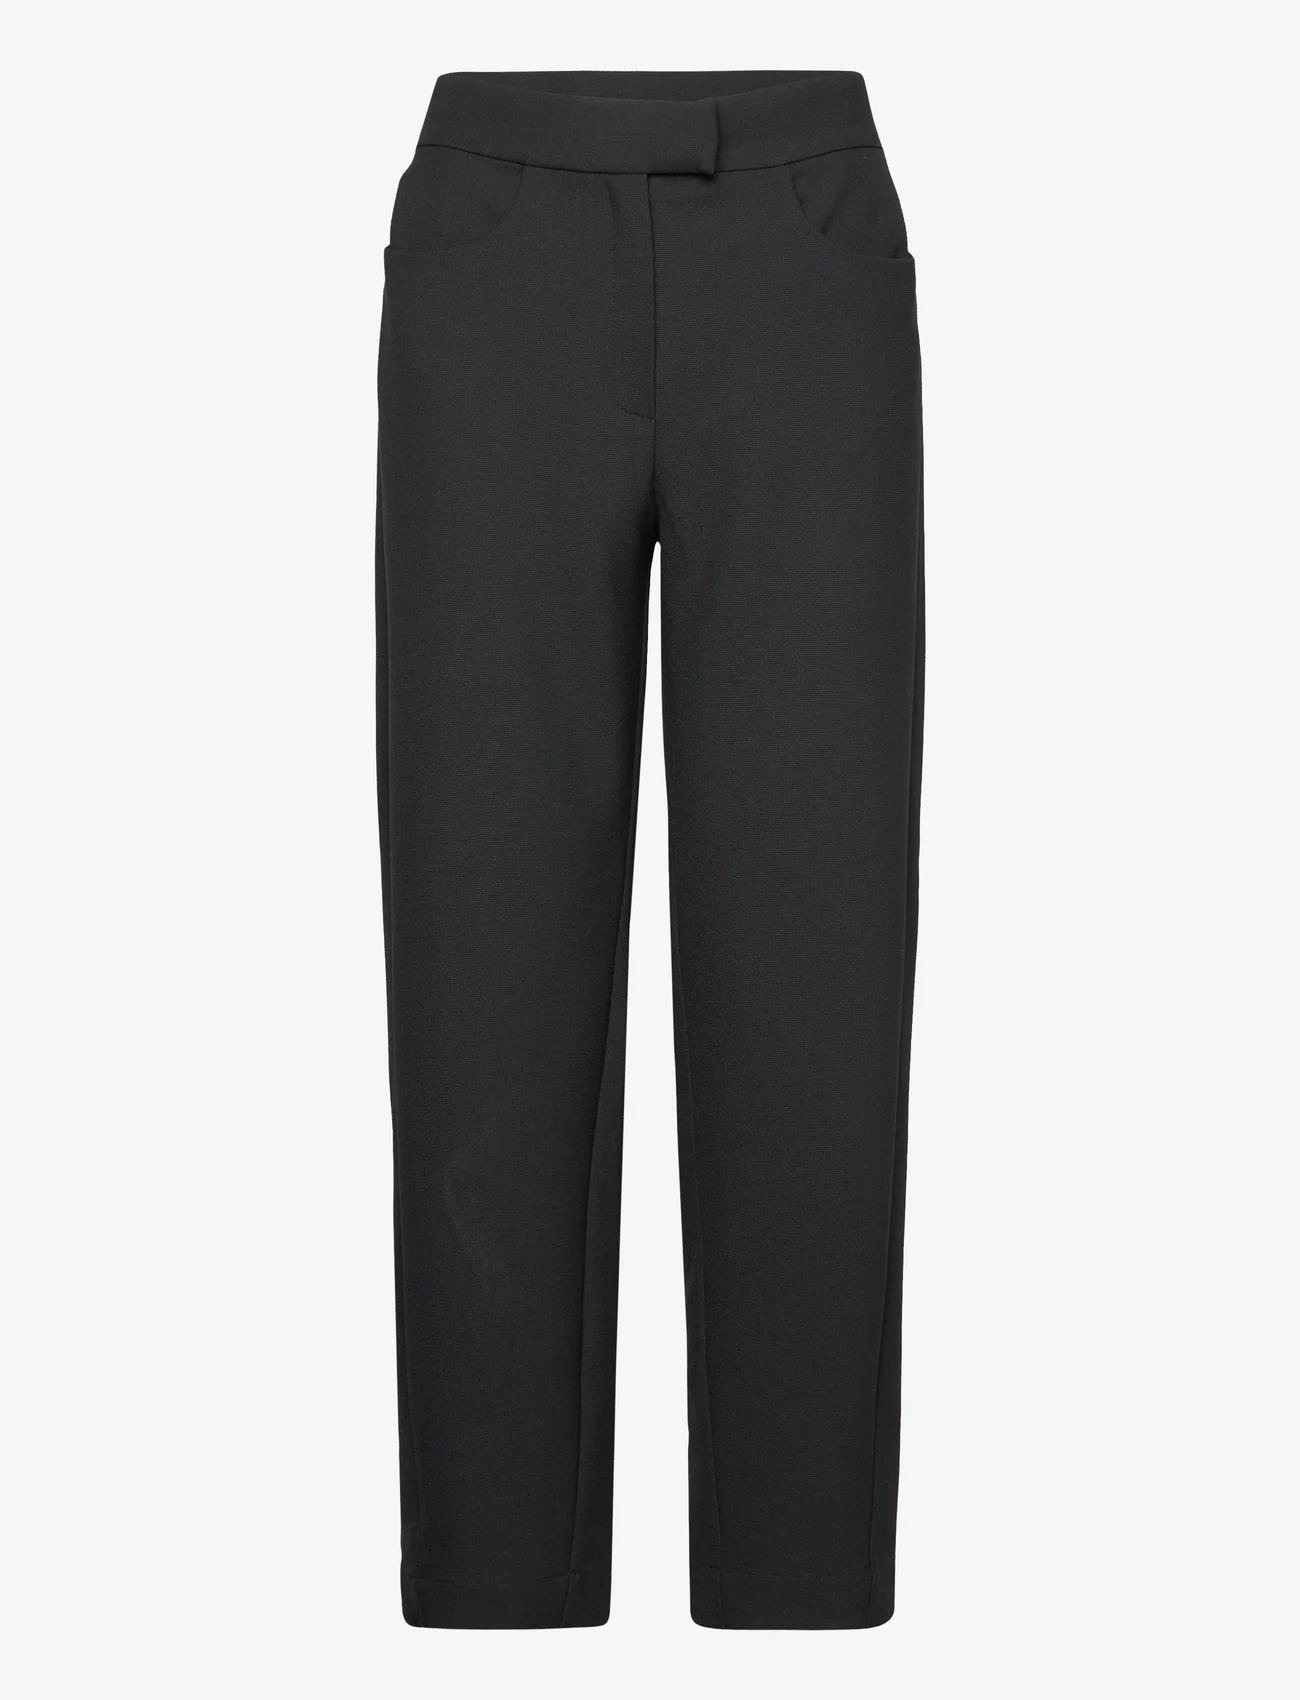 A Part Of The Art - RELAXED PANTS - formele broeken - black - 0